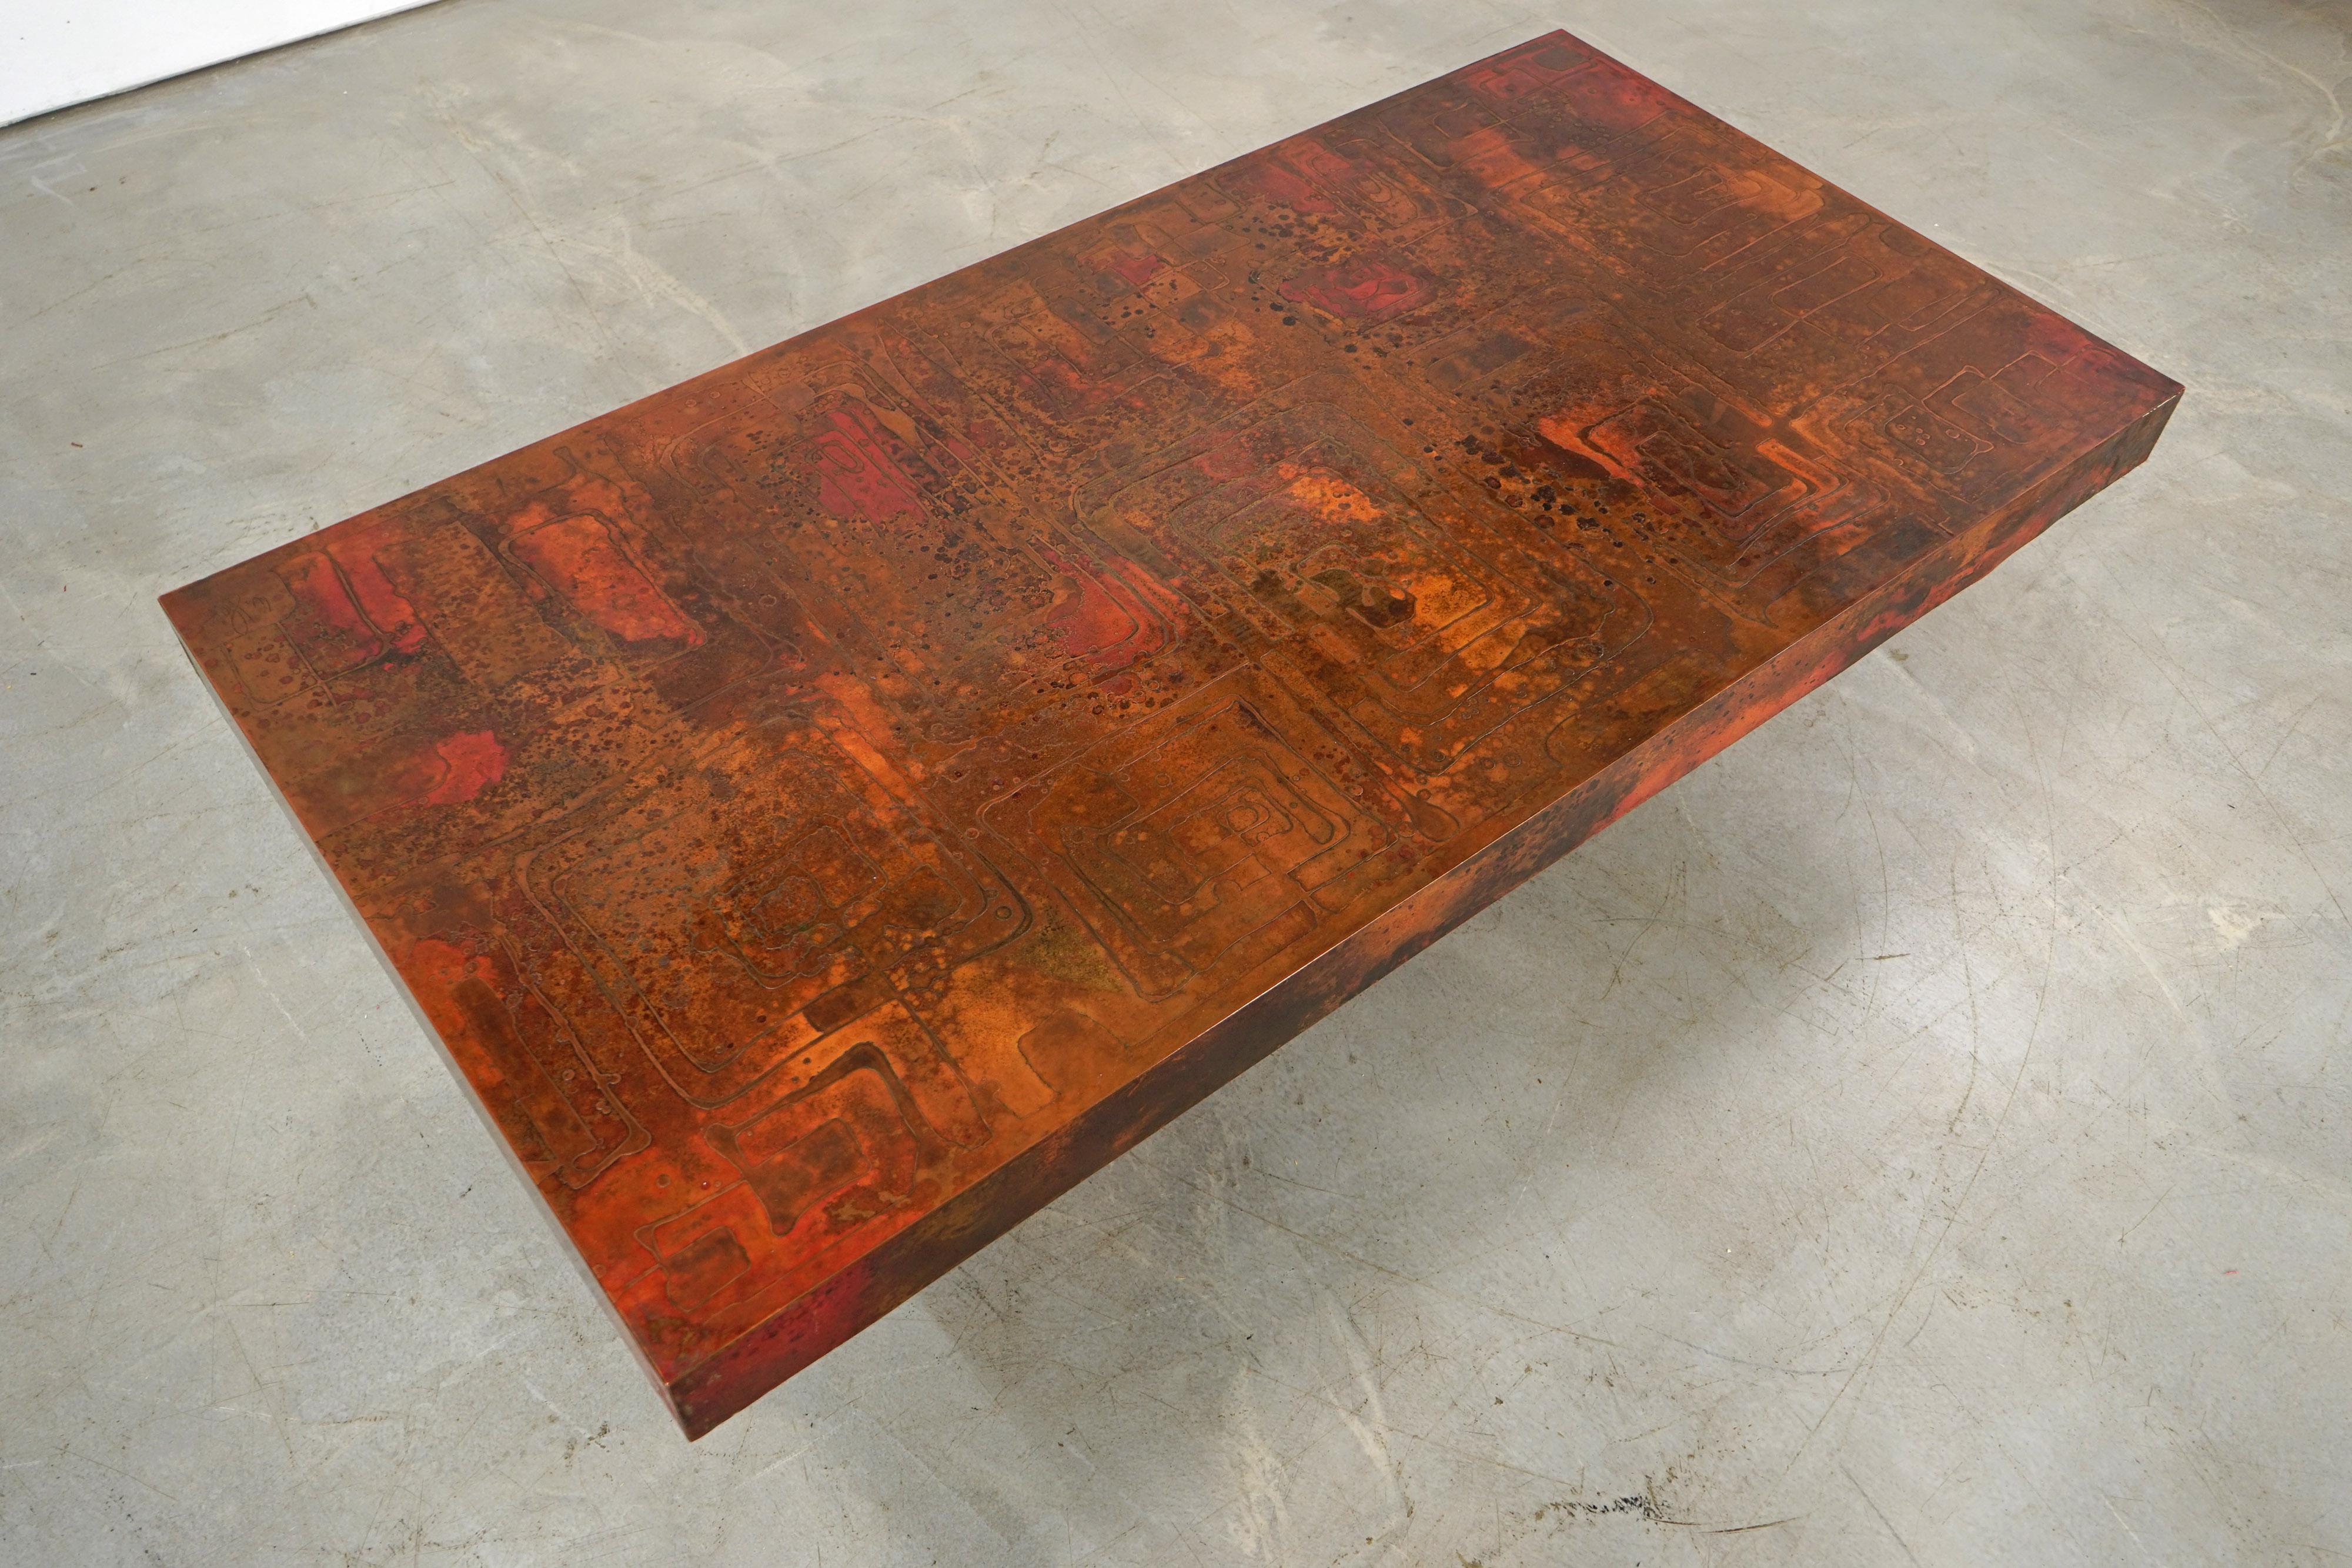 German Etched and Fire Oxidized Copper Coffee Table by Bernhard Rohne, 1960s For Sale